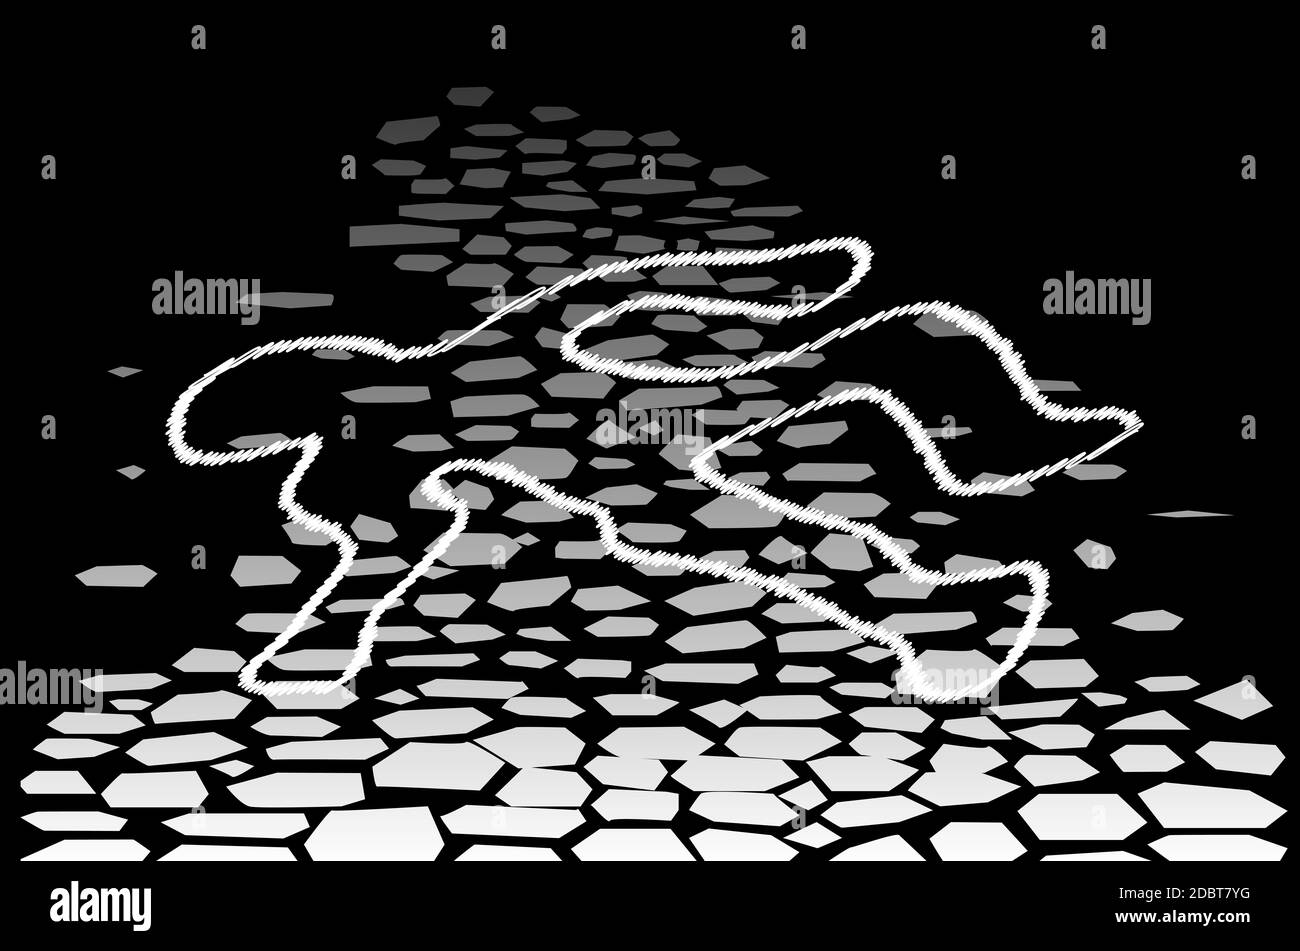 A body outline on a cobbled street with a black background Stock Photo